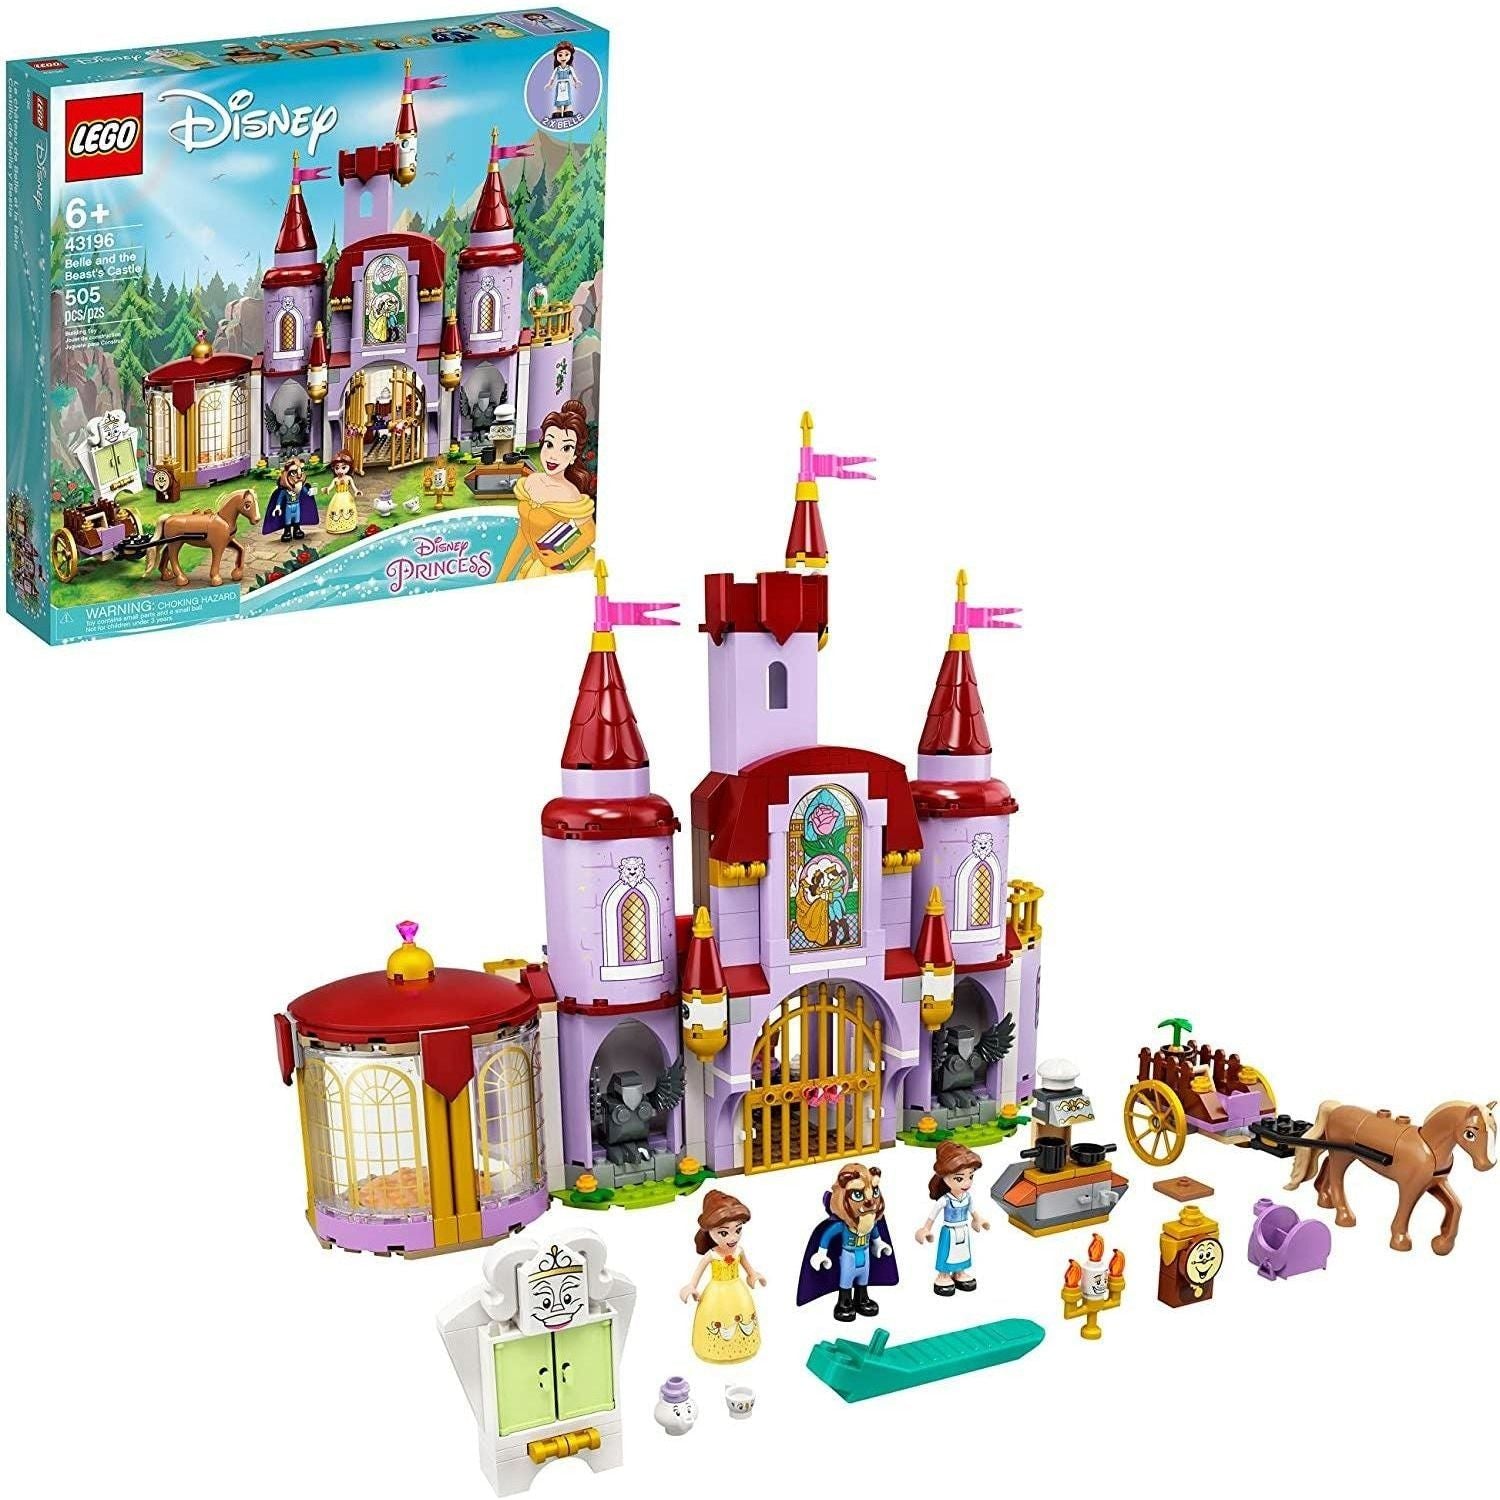 LEGO 43196 Belle & The Beast’s Castle Kit An Iconic Castle Construction 505 Pieces - BumbleToys - 6+ Years, Girls, LEGO, OXE, Pre-Order